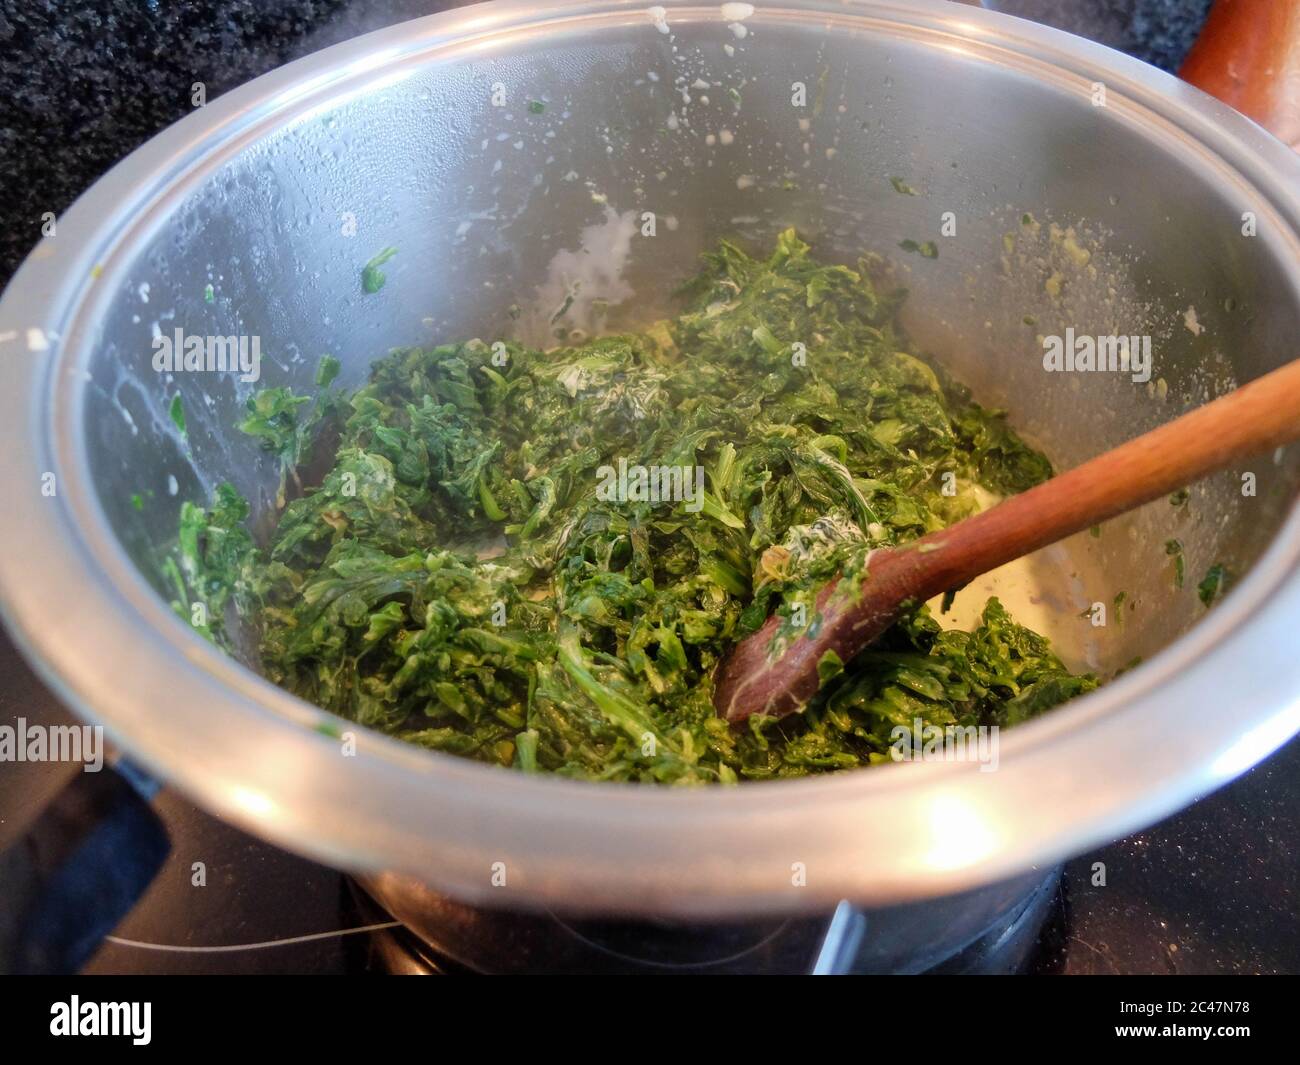 Spinach cooked in a span Stock Photo